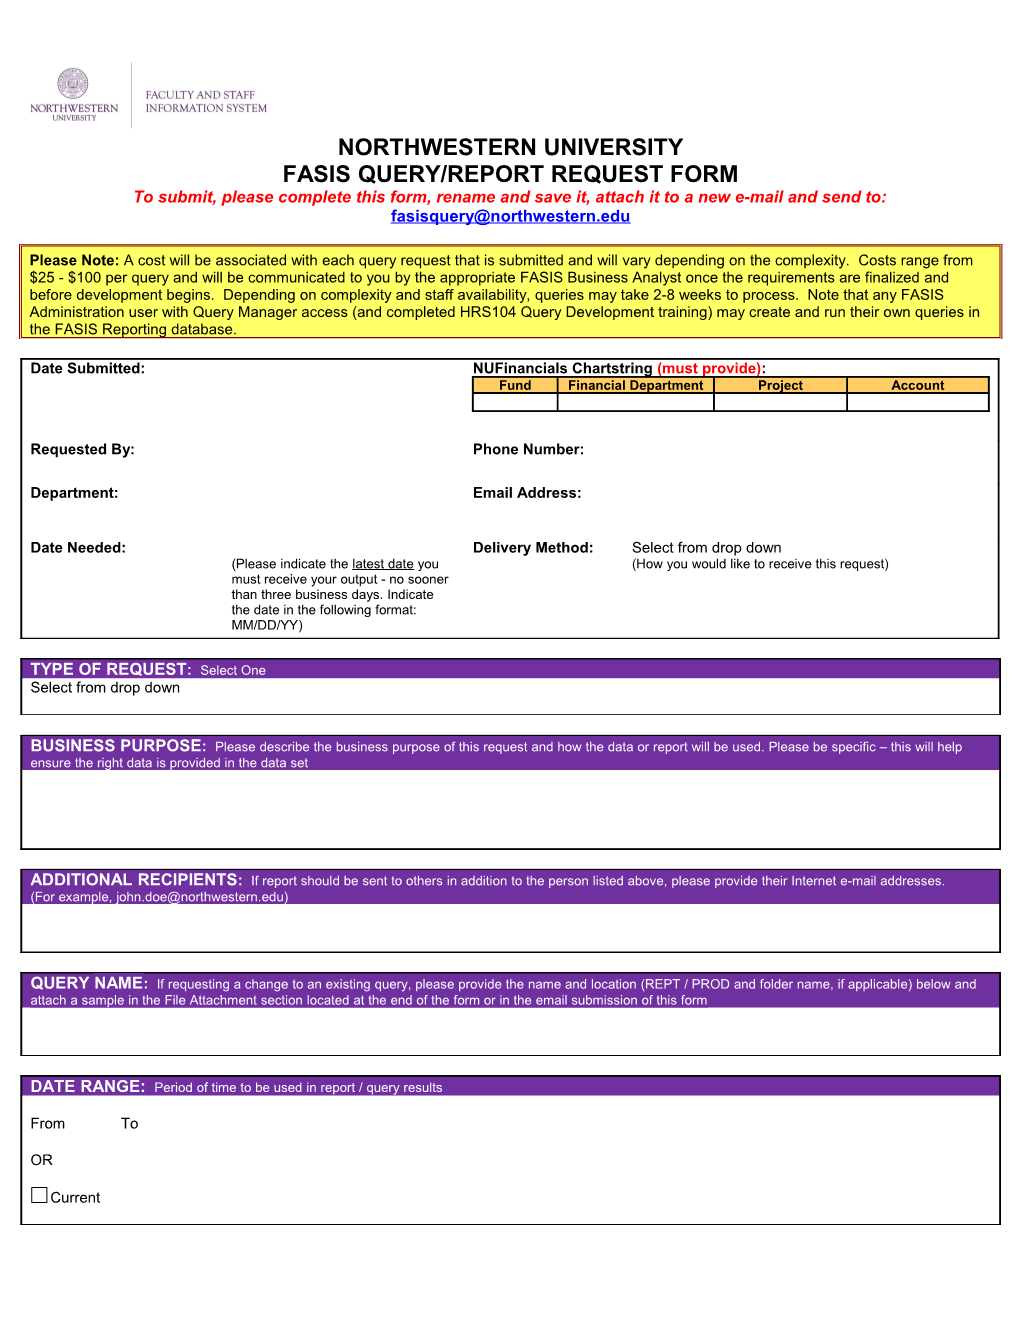 FASIS Query/Report Request Form